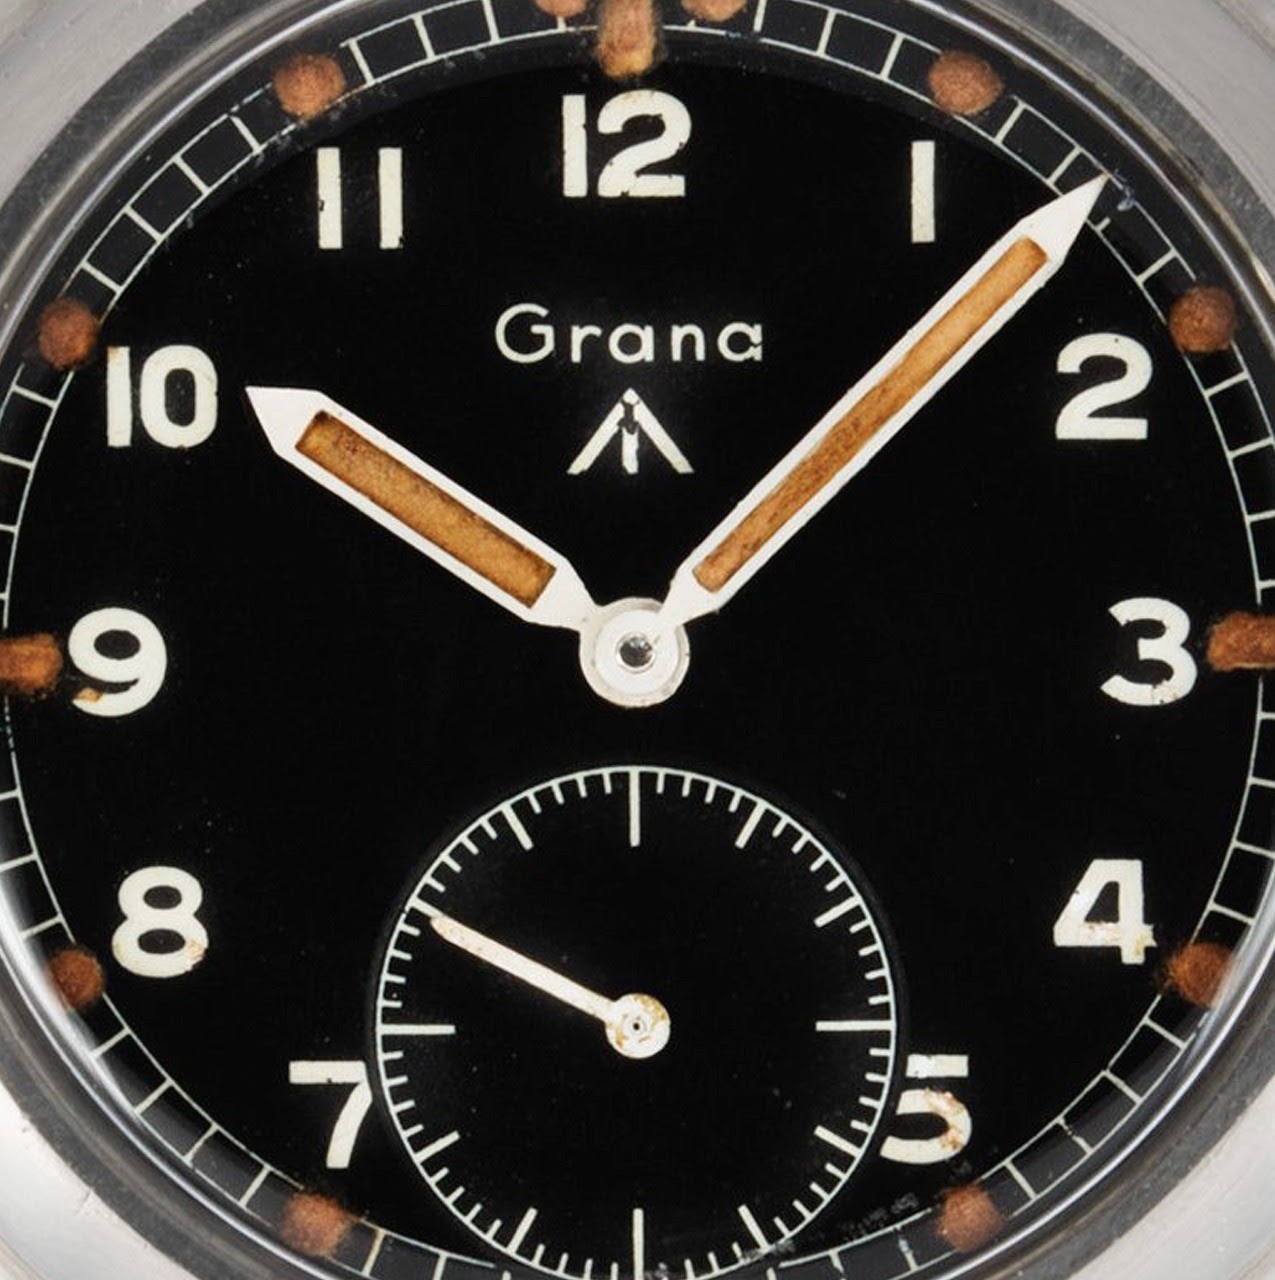 Our Latest Watches For sale - Including the Grana Dirty Dozen! – Vintage  Watch Specialist